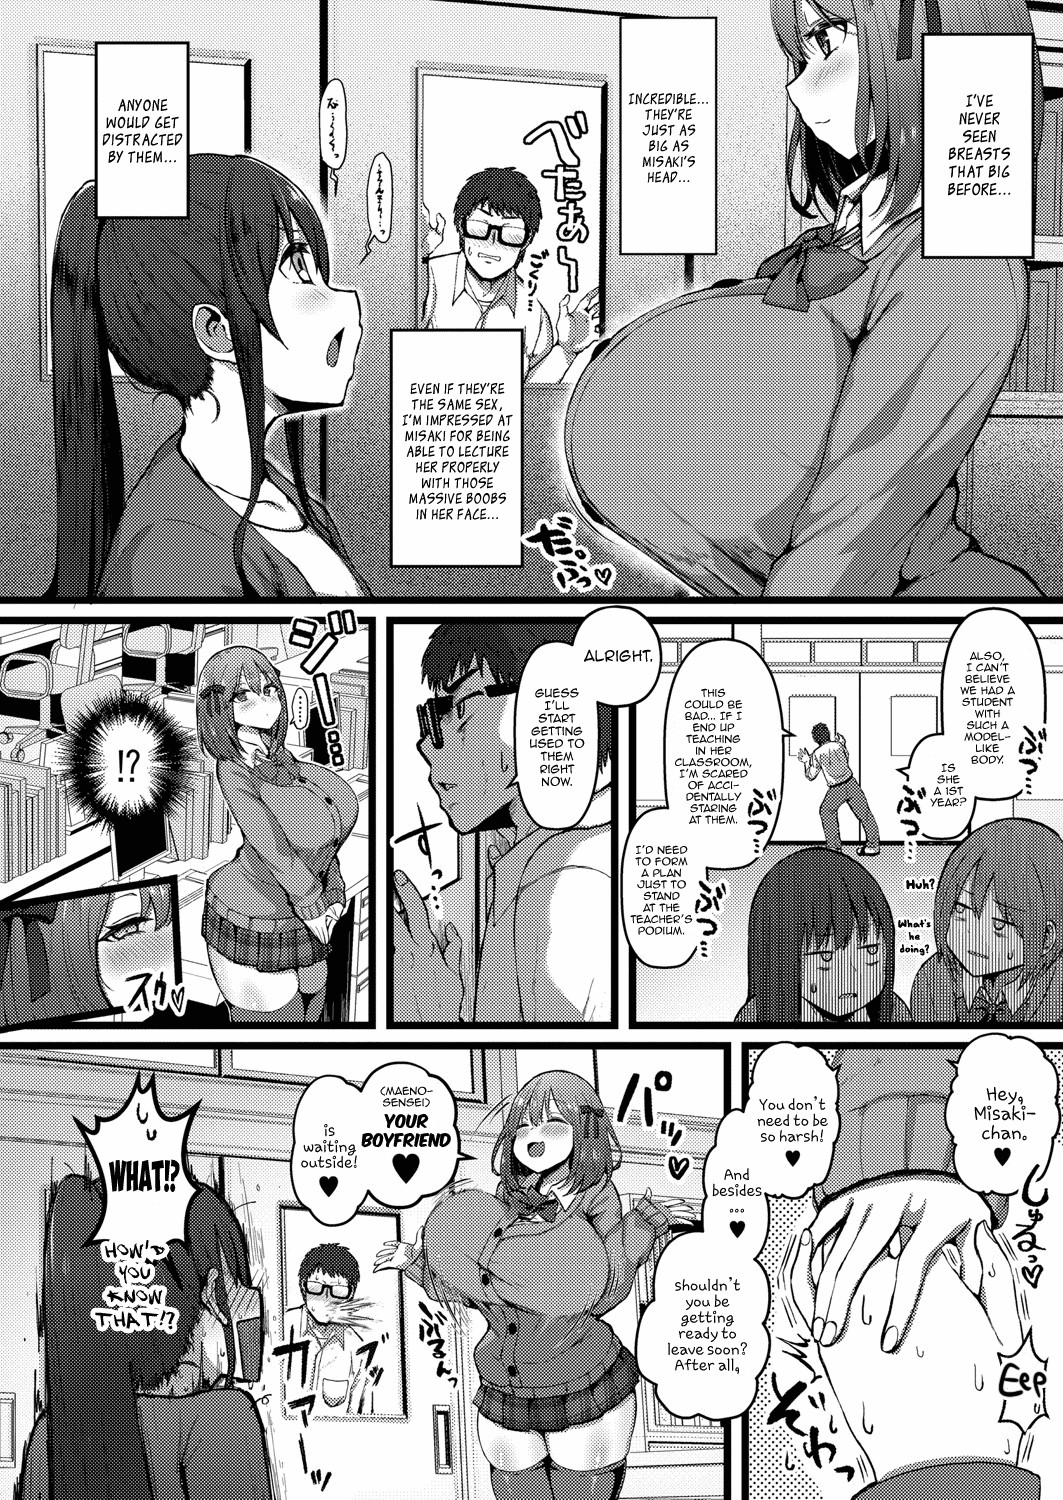 Hentai Manga Comic-I Have A Girlfriend, So I Won't Be Tempted by My Short, M-cup, Sugary Bully Student's Advances-Read-2